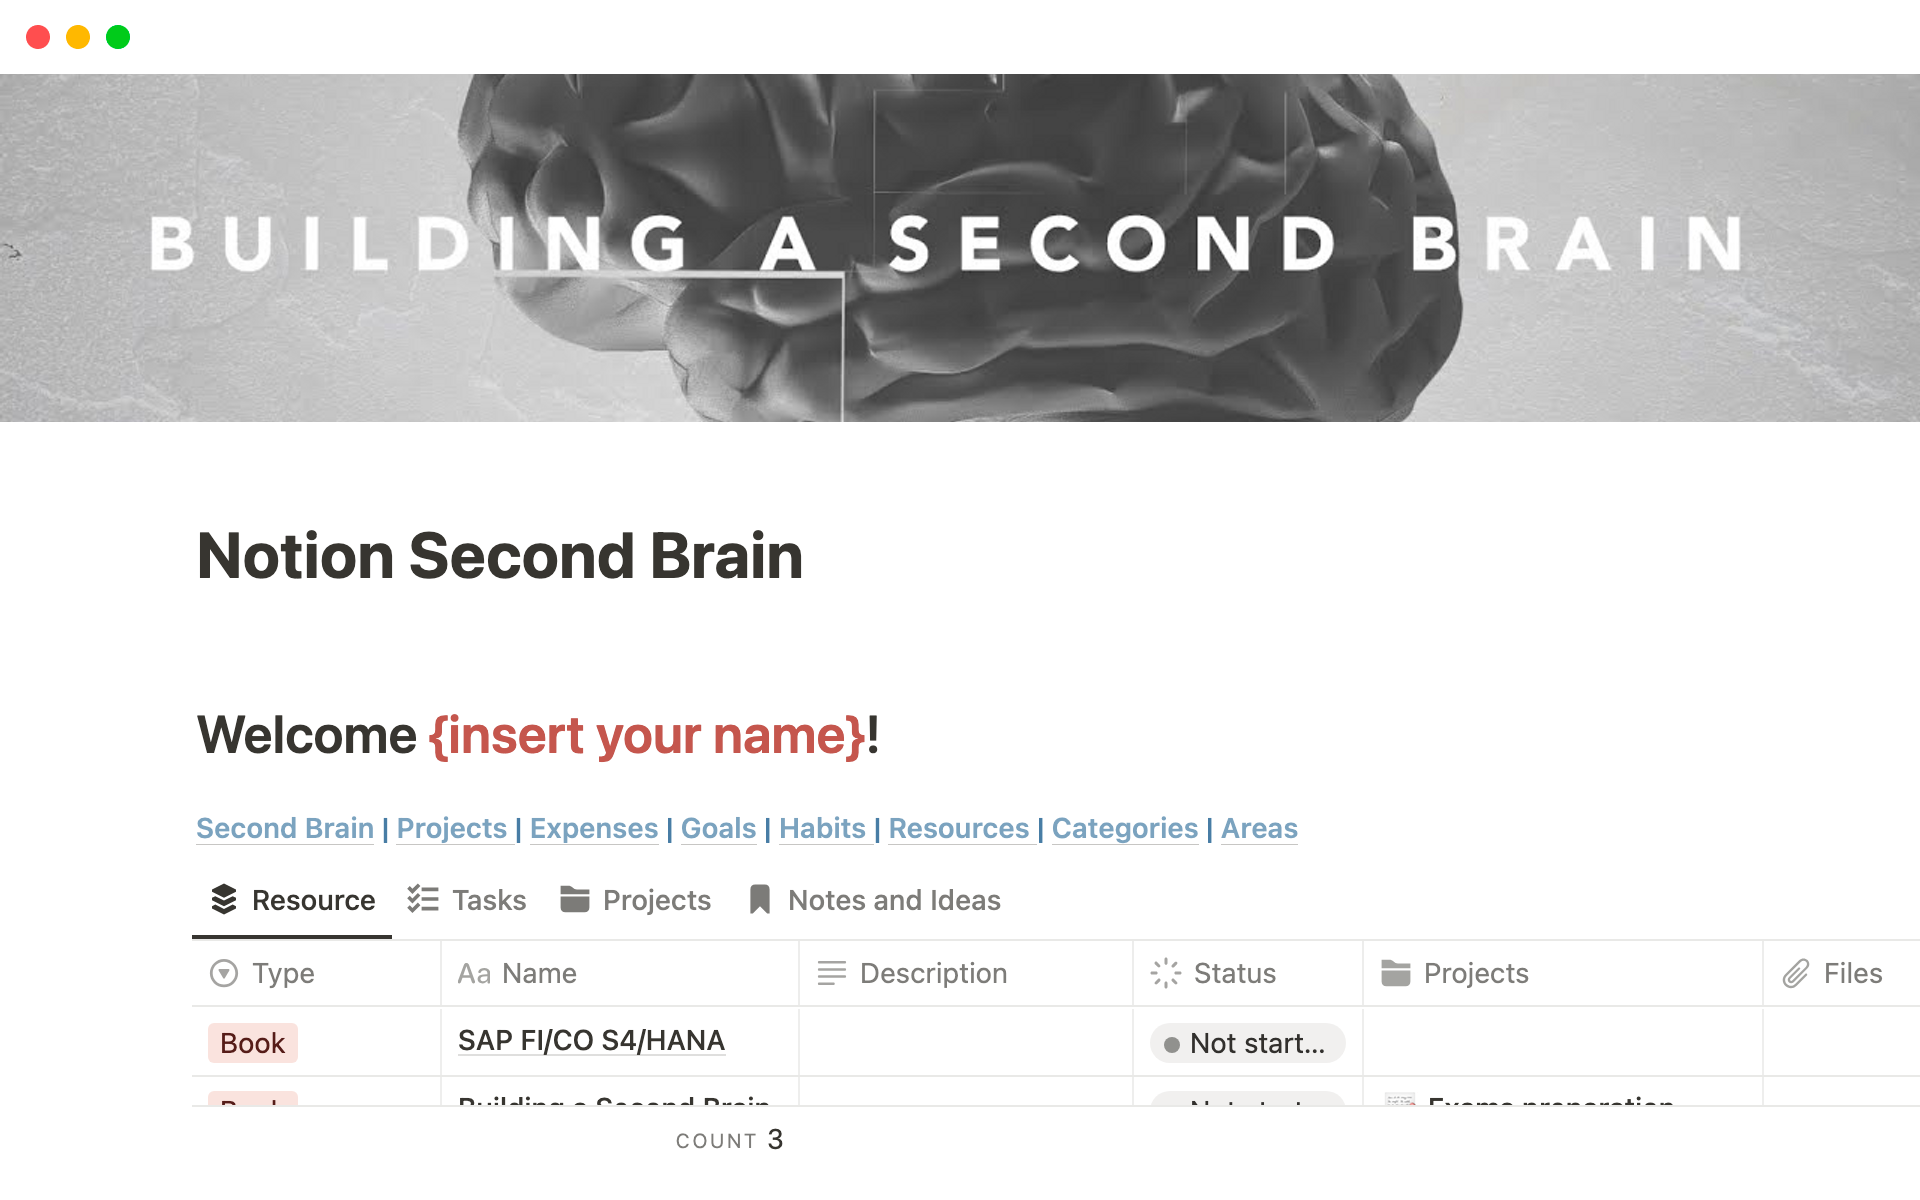 A template preview for Notion Second Brain